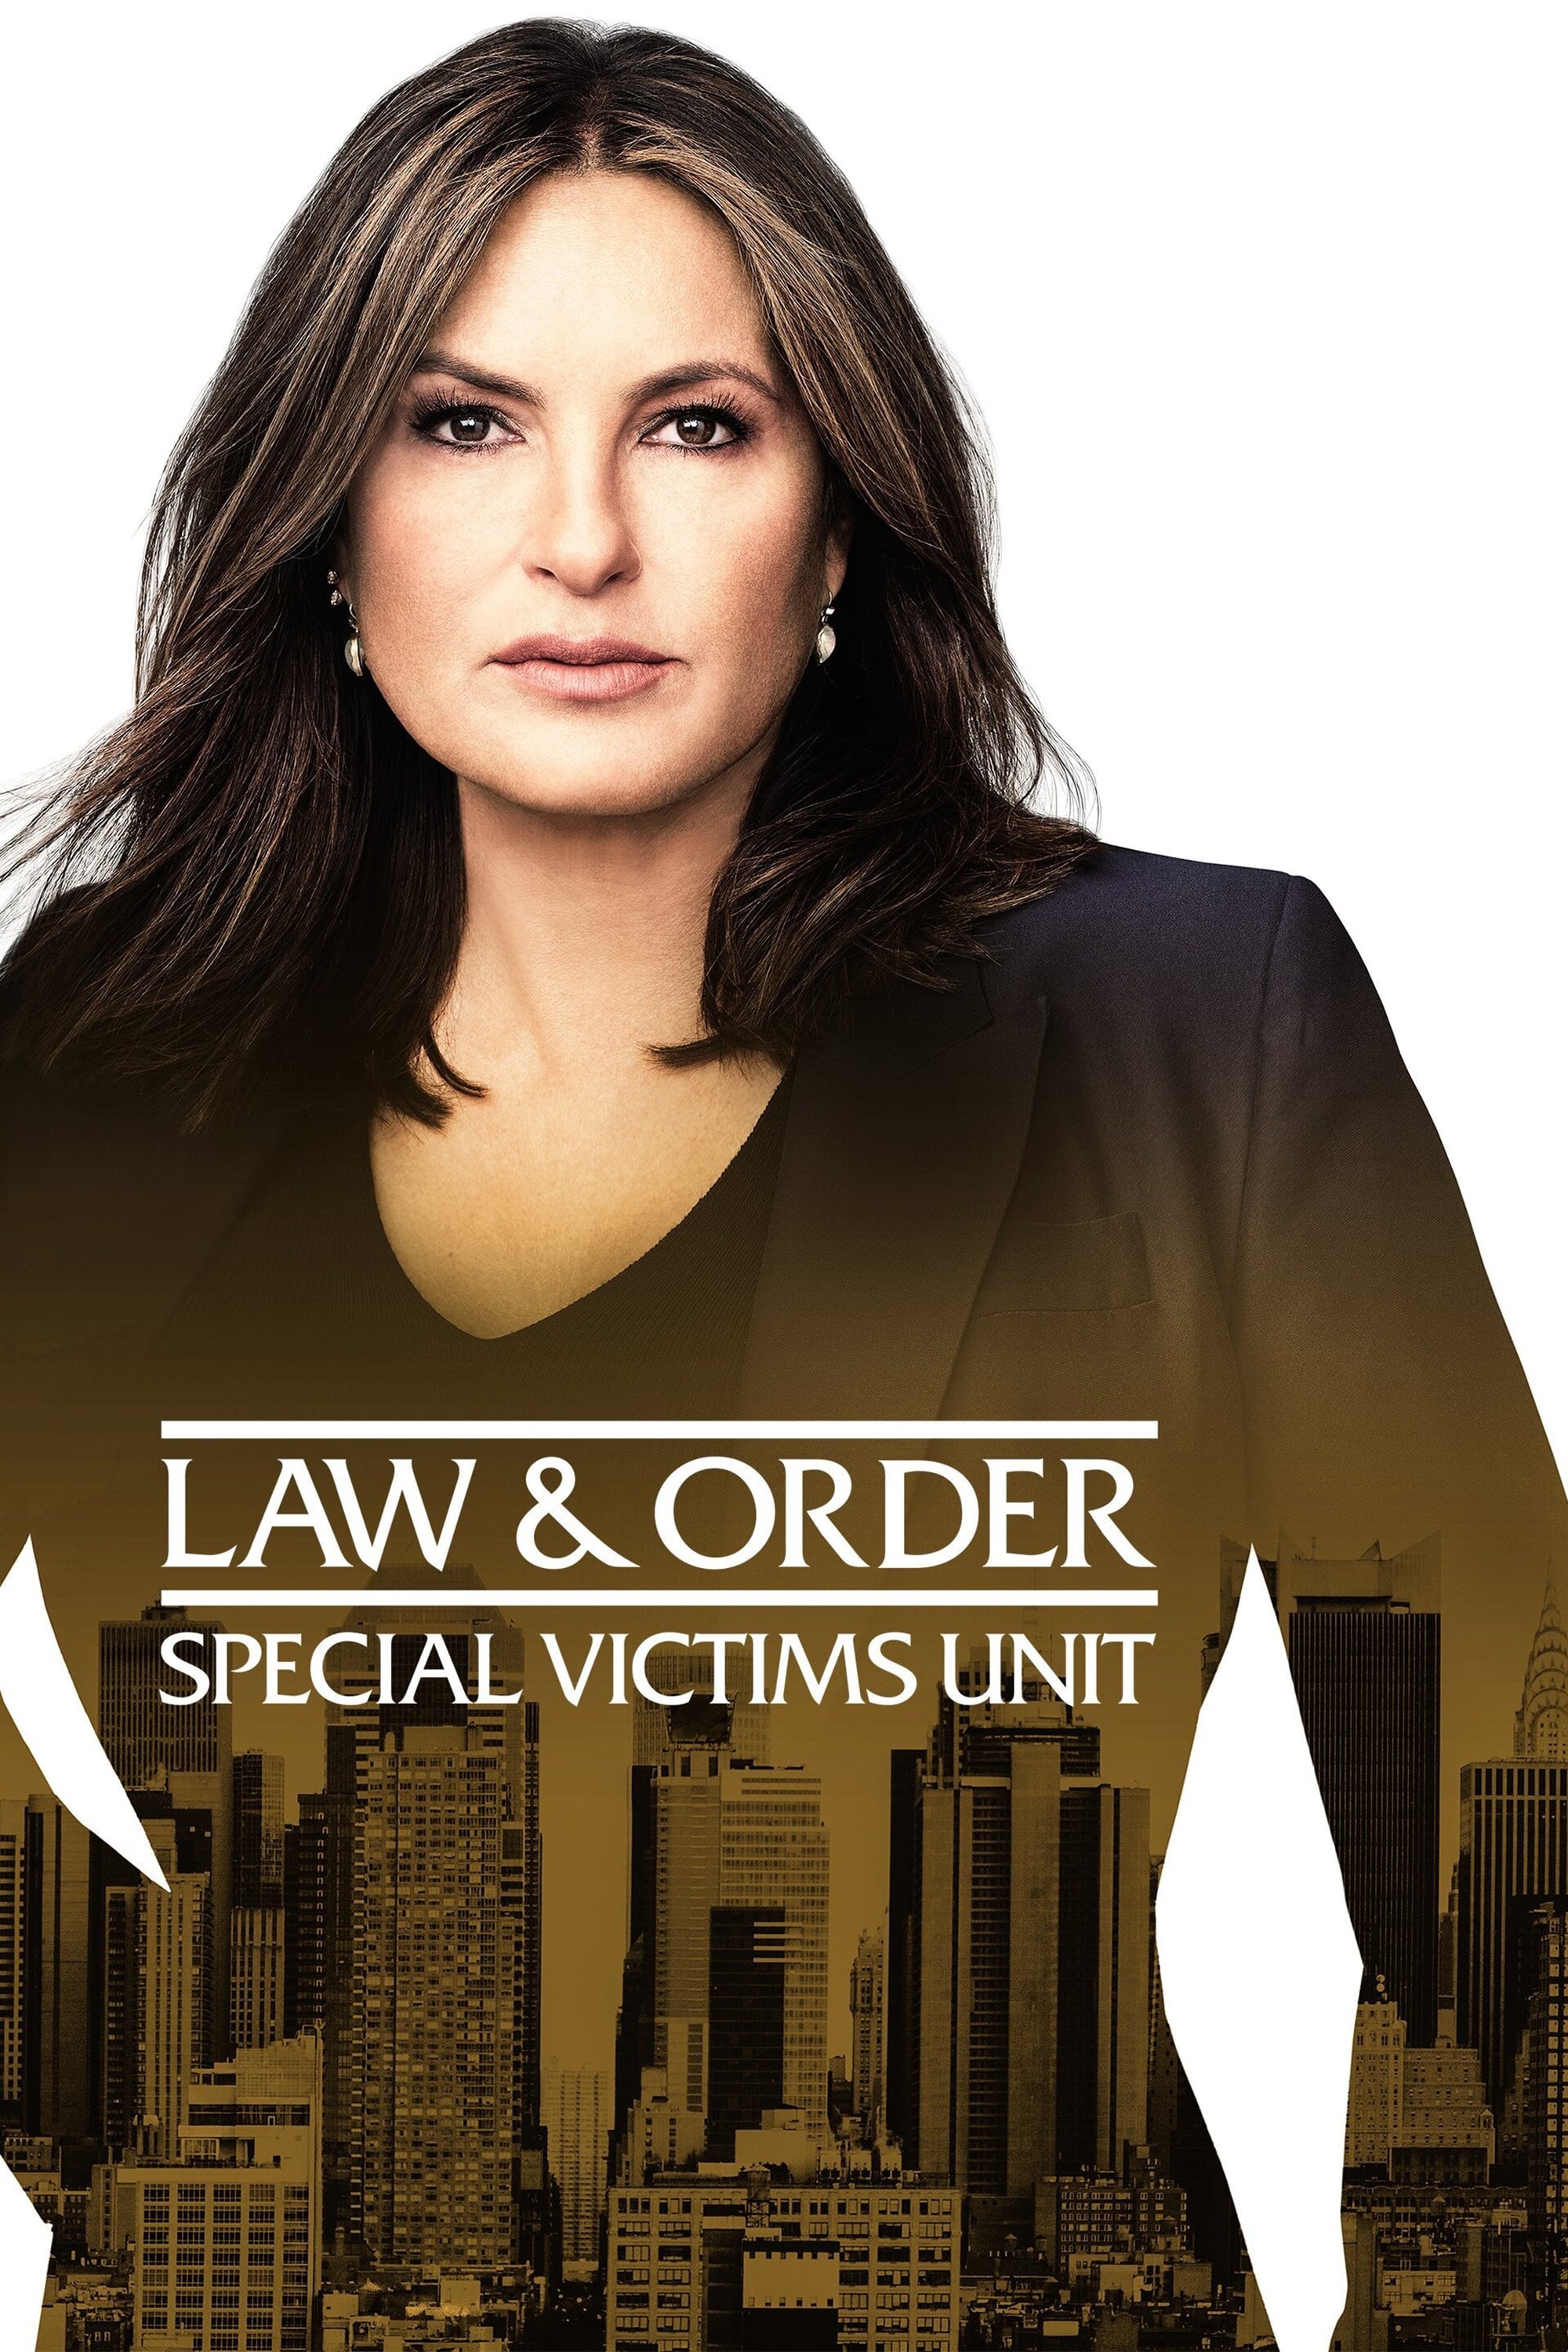 Law & Order: Special Victims Unit TV Shows About Sexual Abuse